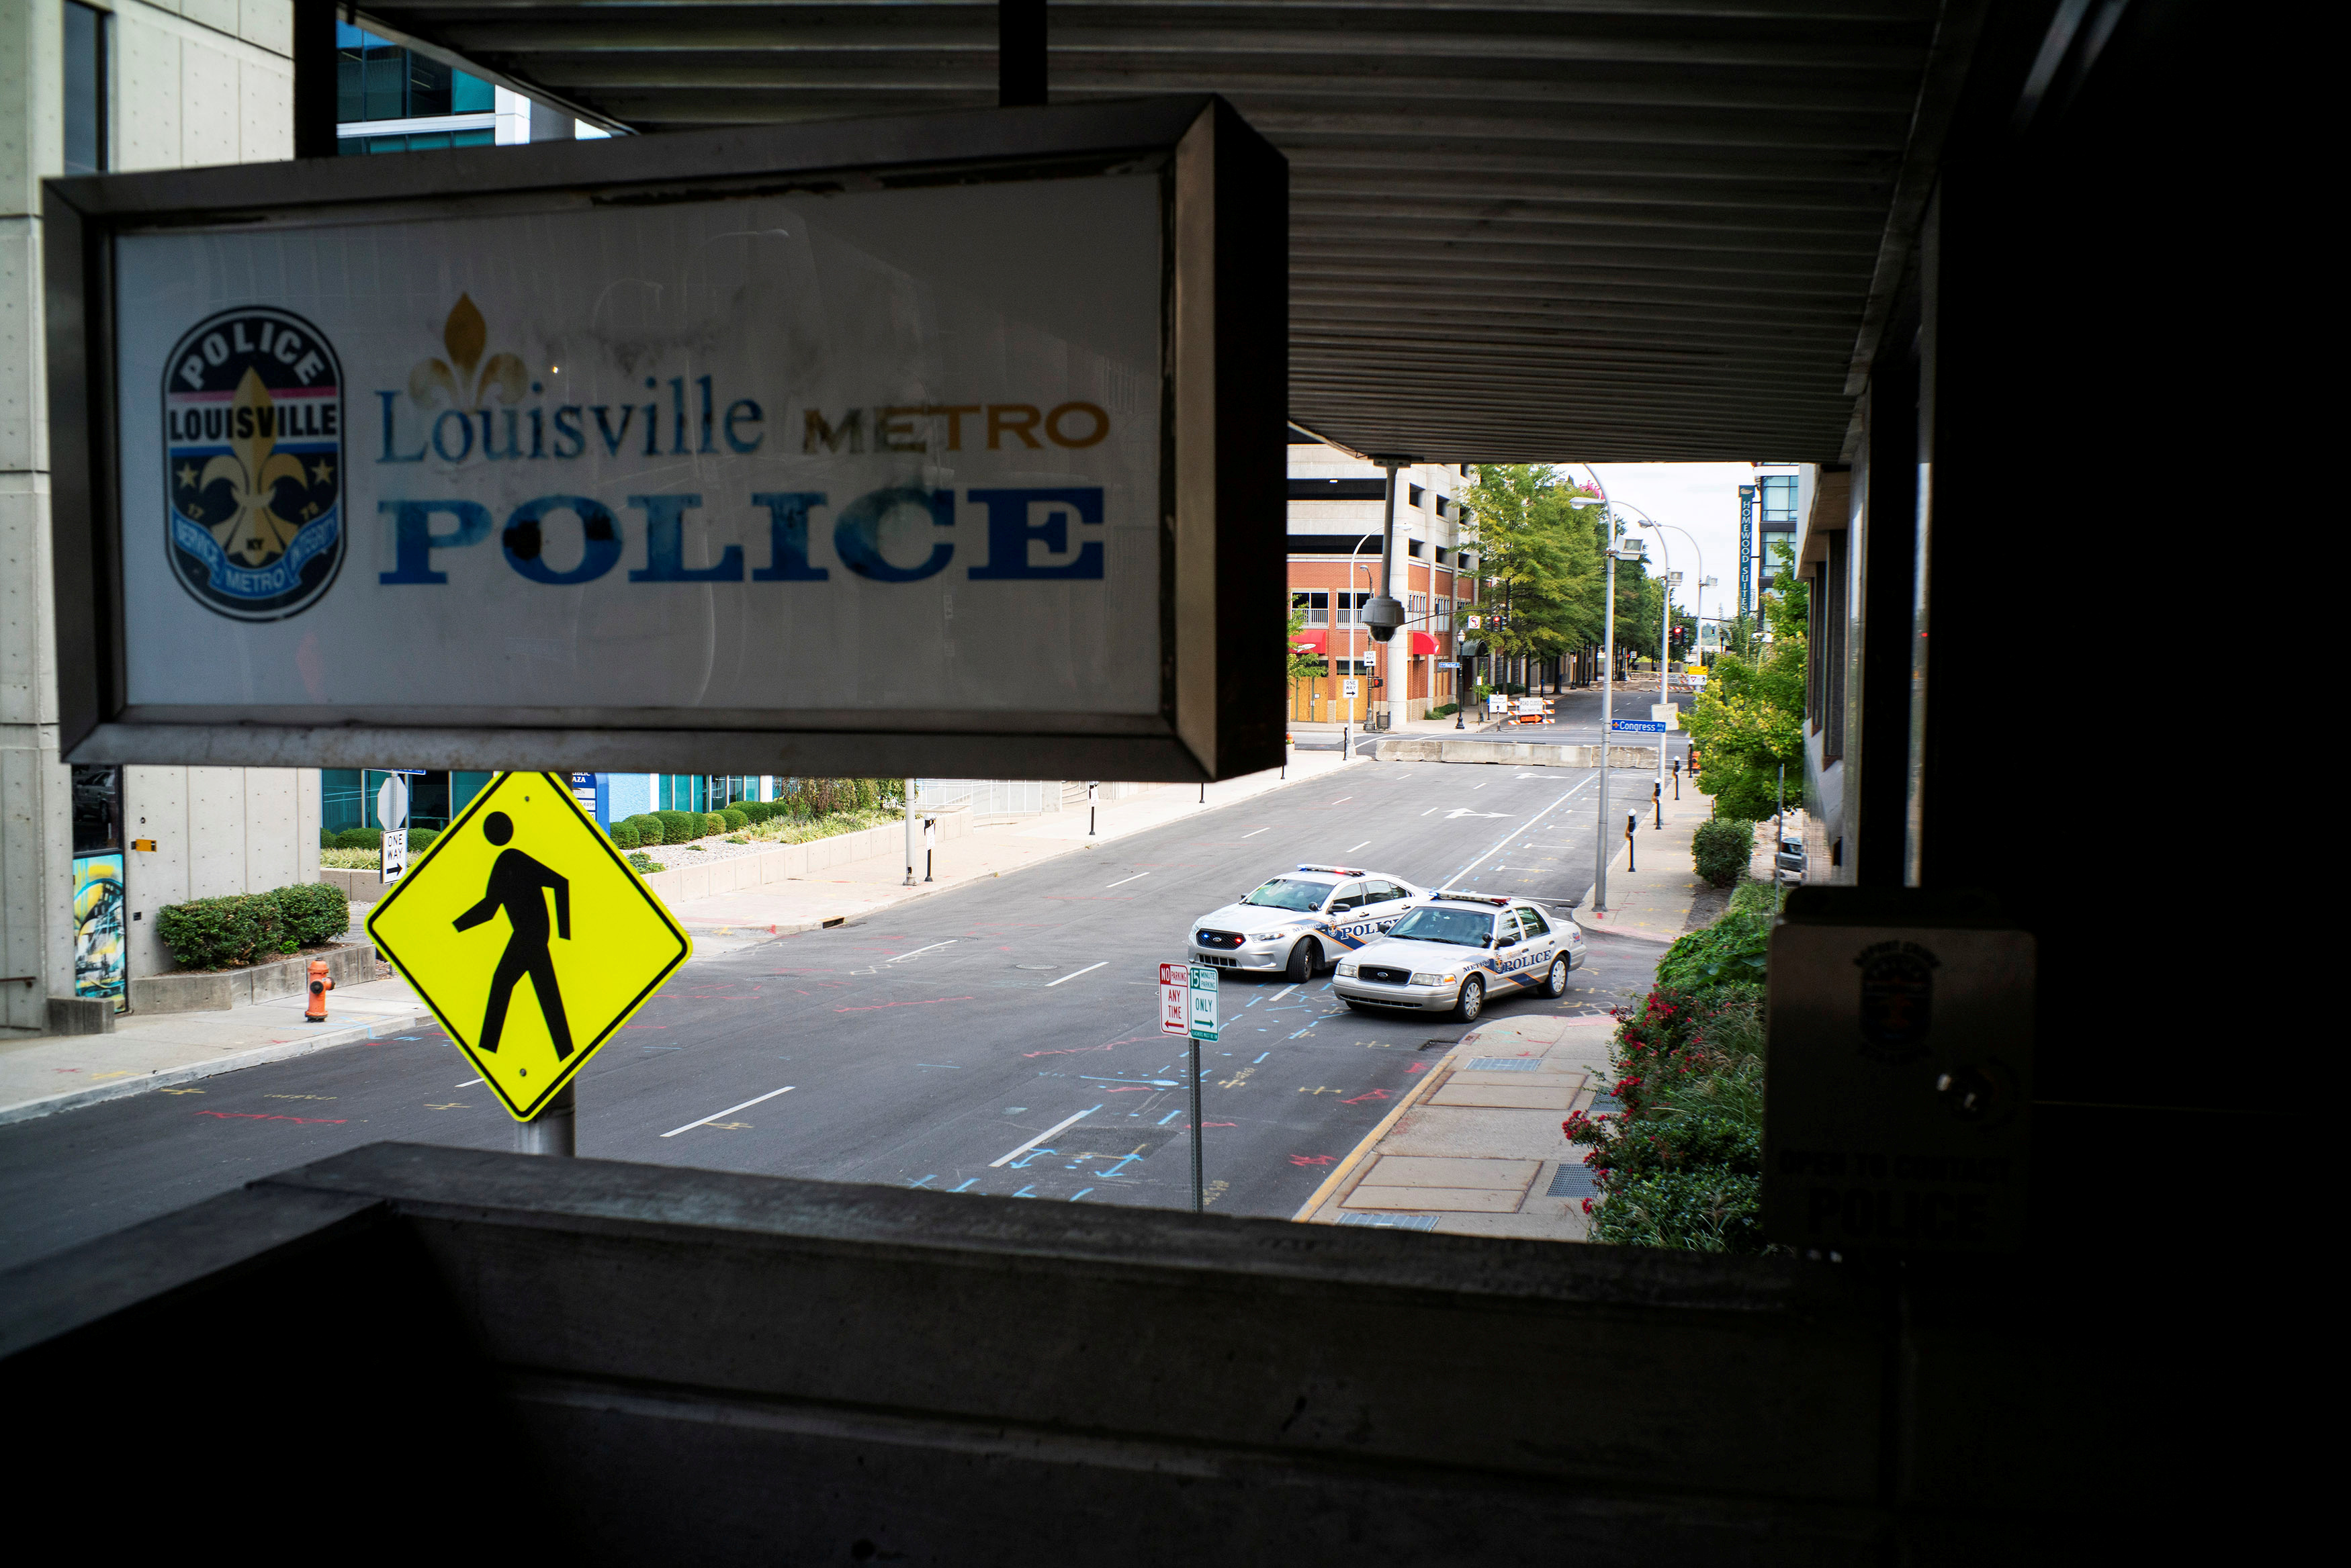 Louisville police cars stand guard outside the police station in an empty street after a grand jury decided not to bring homicide charges against police officers involved in the fatal shooting of Breonna Taylor, in Louisville, Kentucky September 26, 2020. REUTERS/Eduardo Munoz - RC2F6J9DZBN7